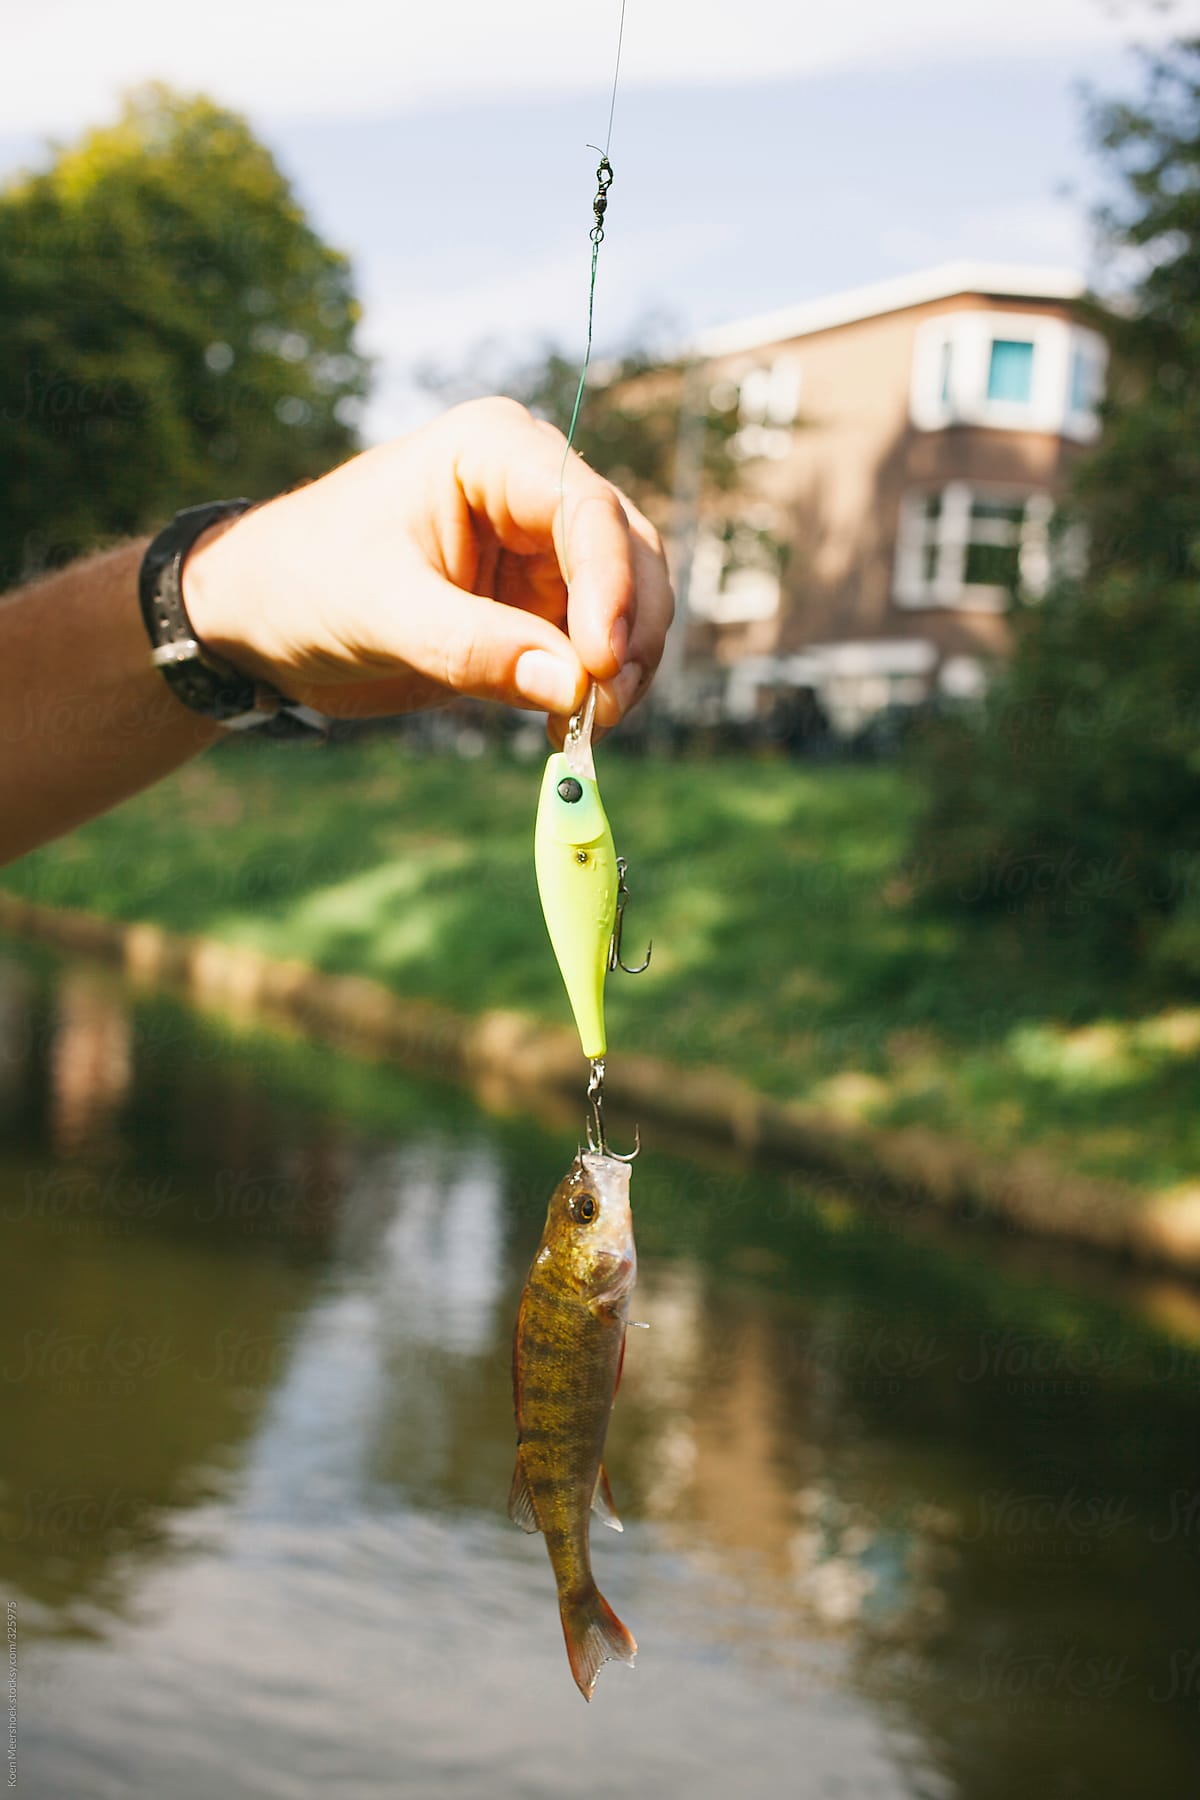 Man holding a fishing lure with a fish underneath.